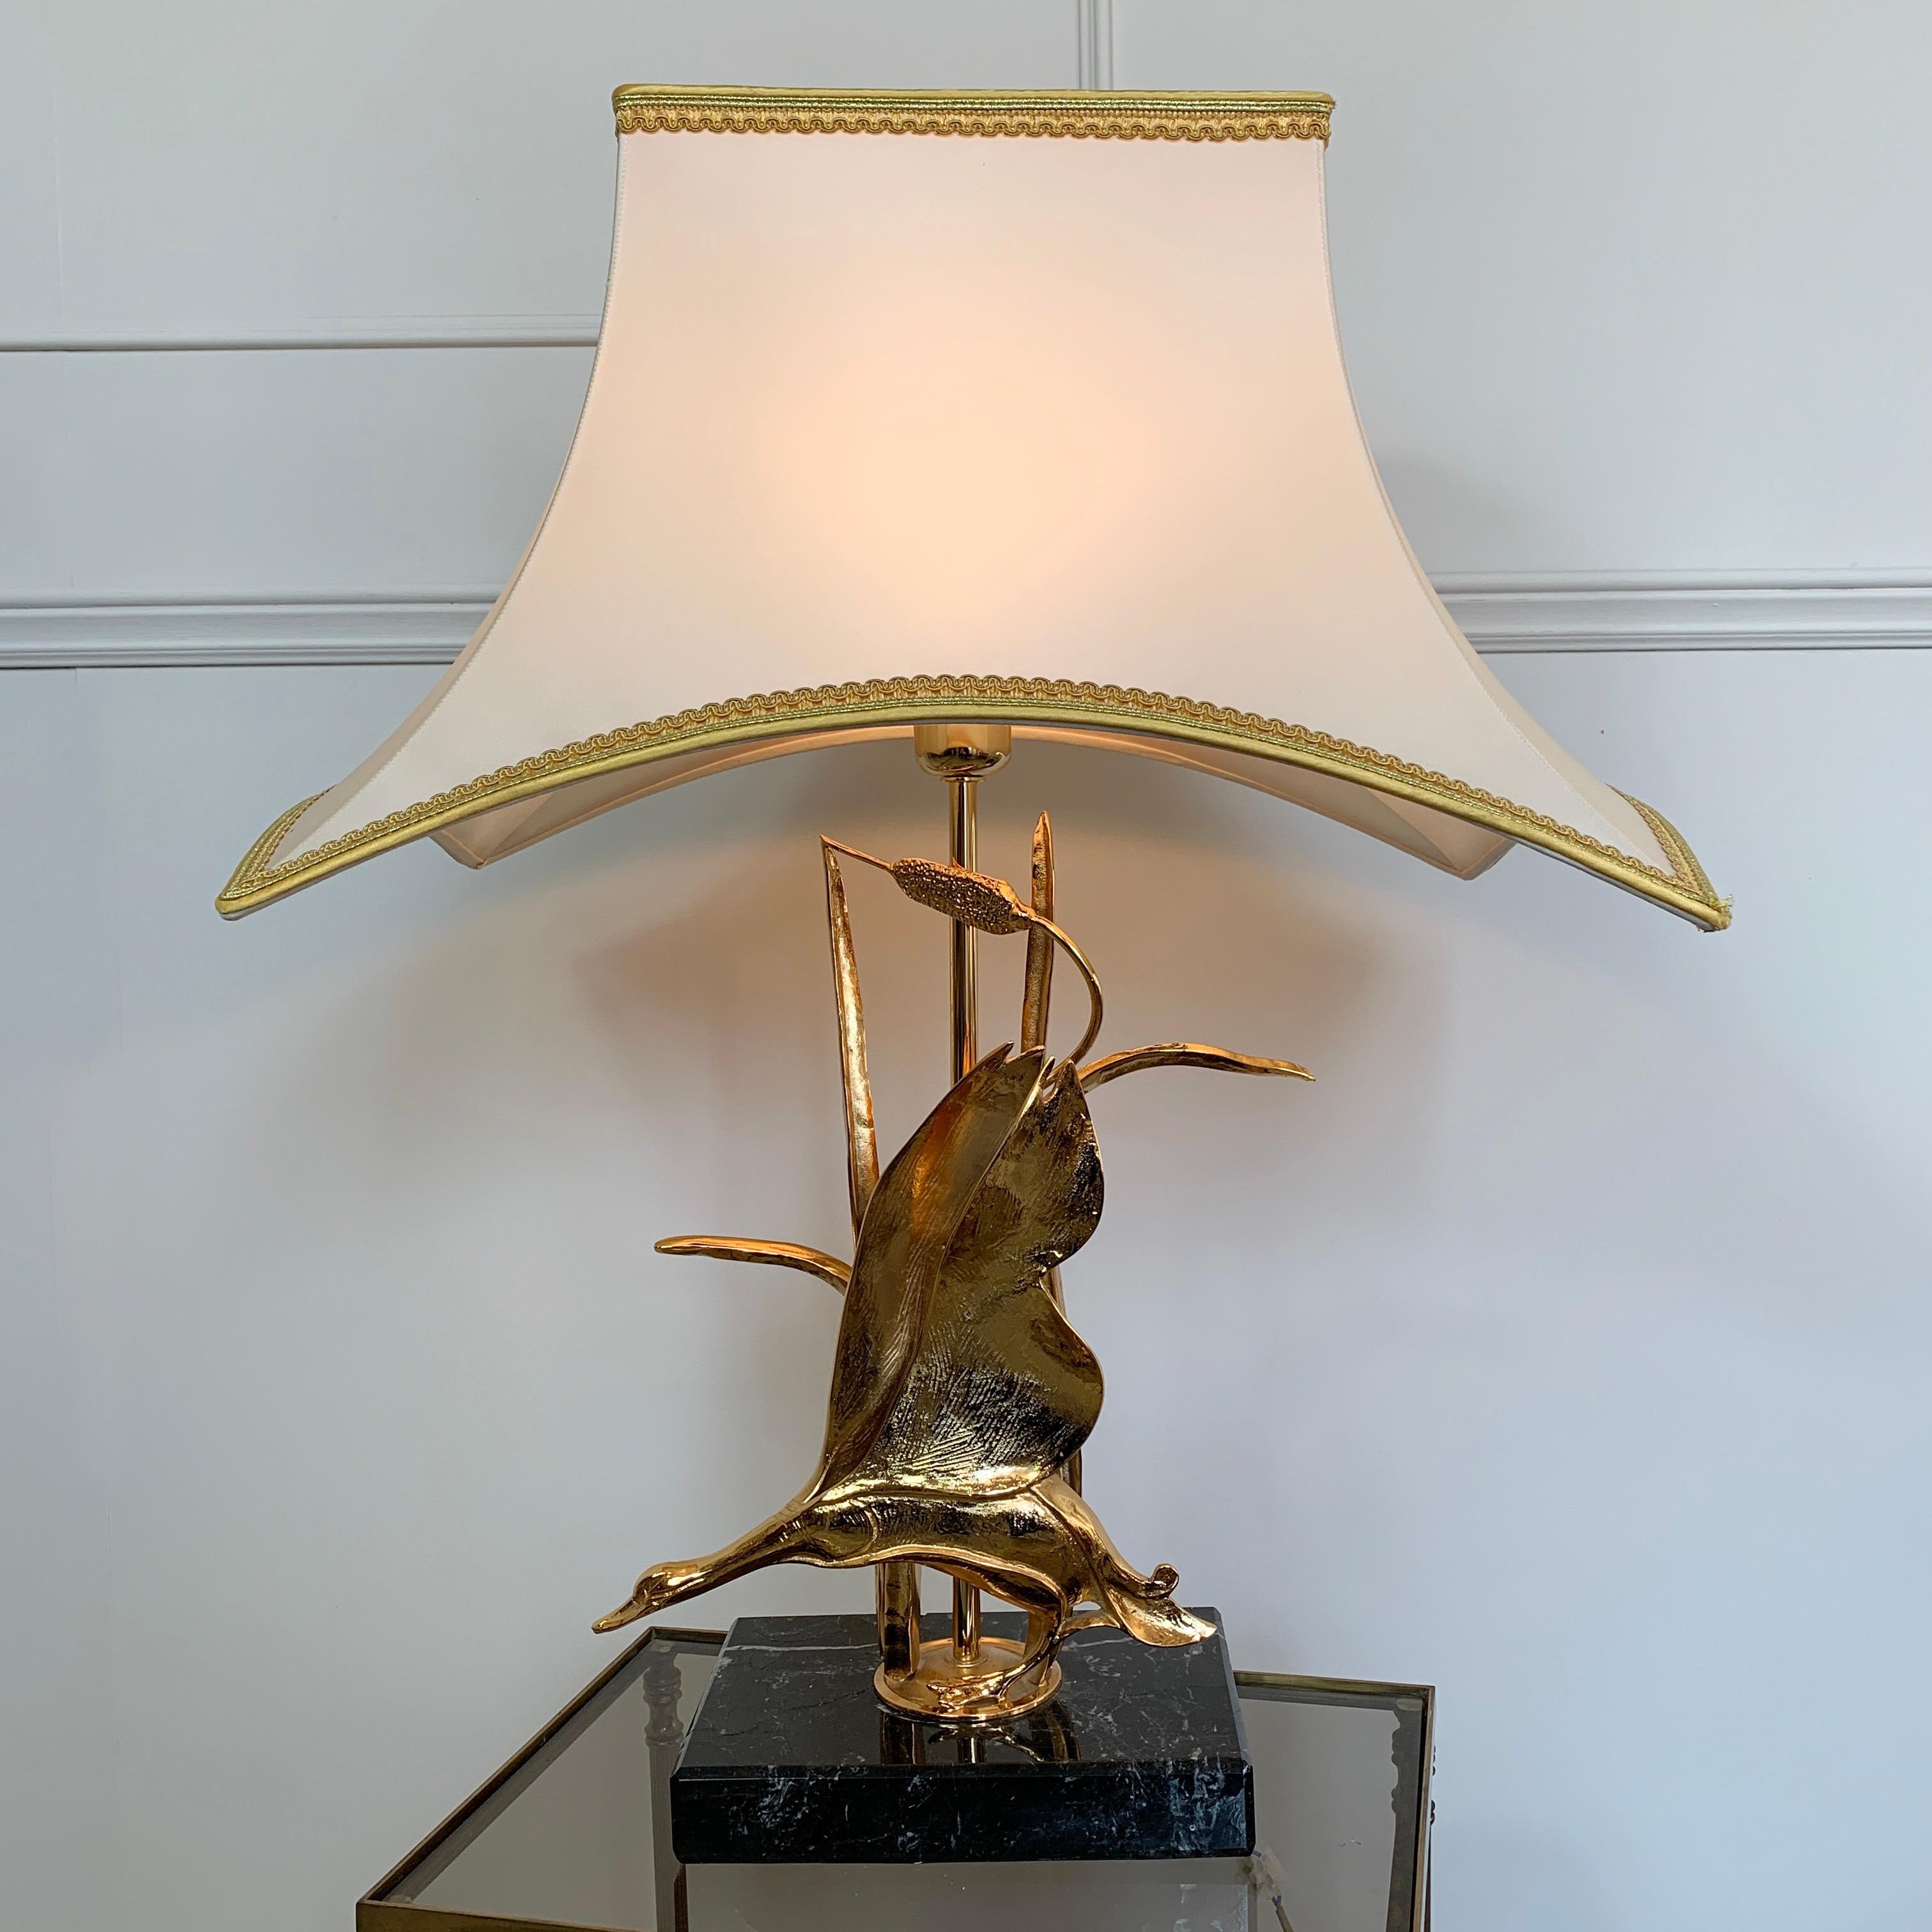 Lanciotto Galeotti Gold Goose Table Lamp, Italy, 1970s For Sale 2